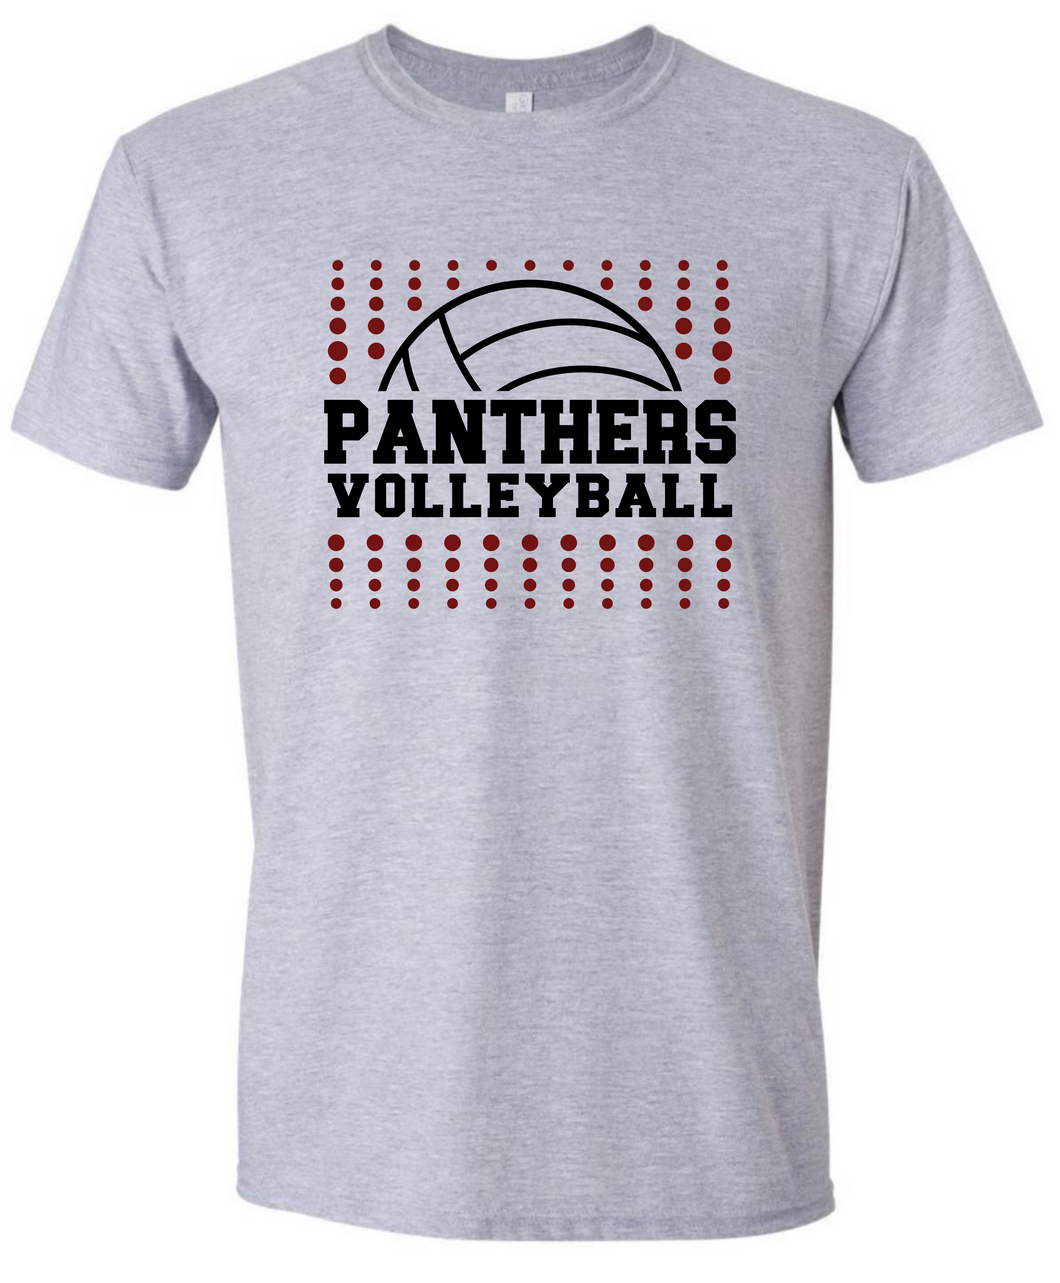 Panthers Volleyball Dot Tshirt